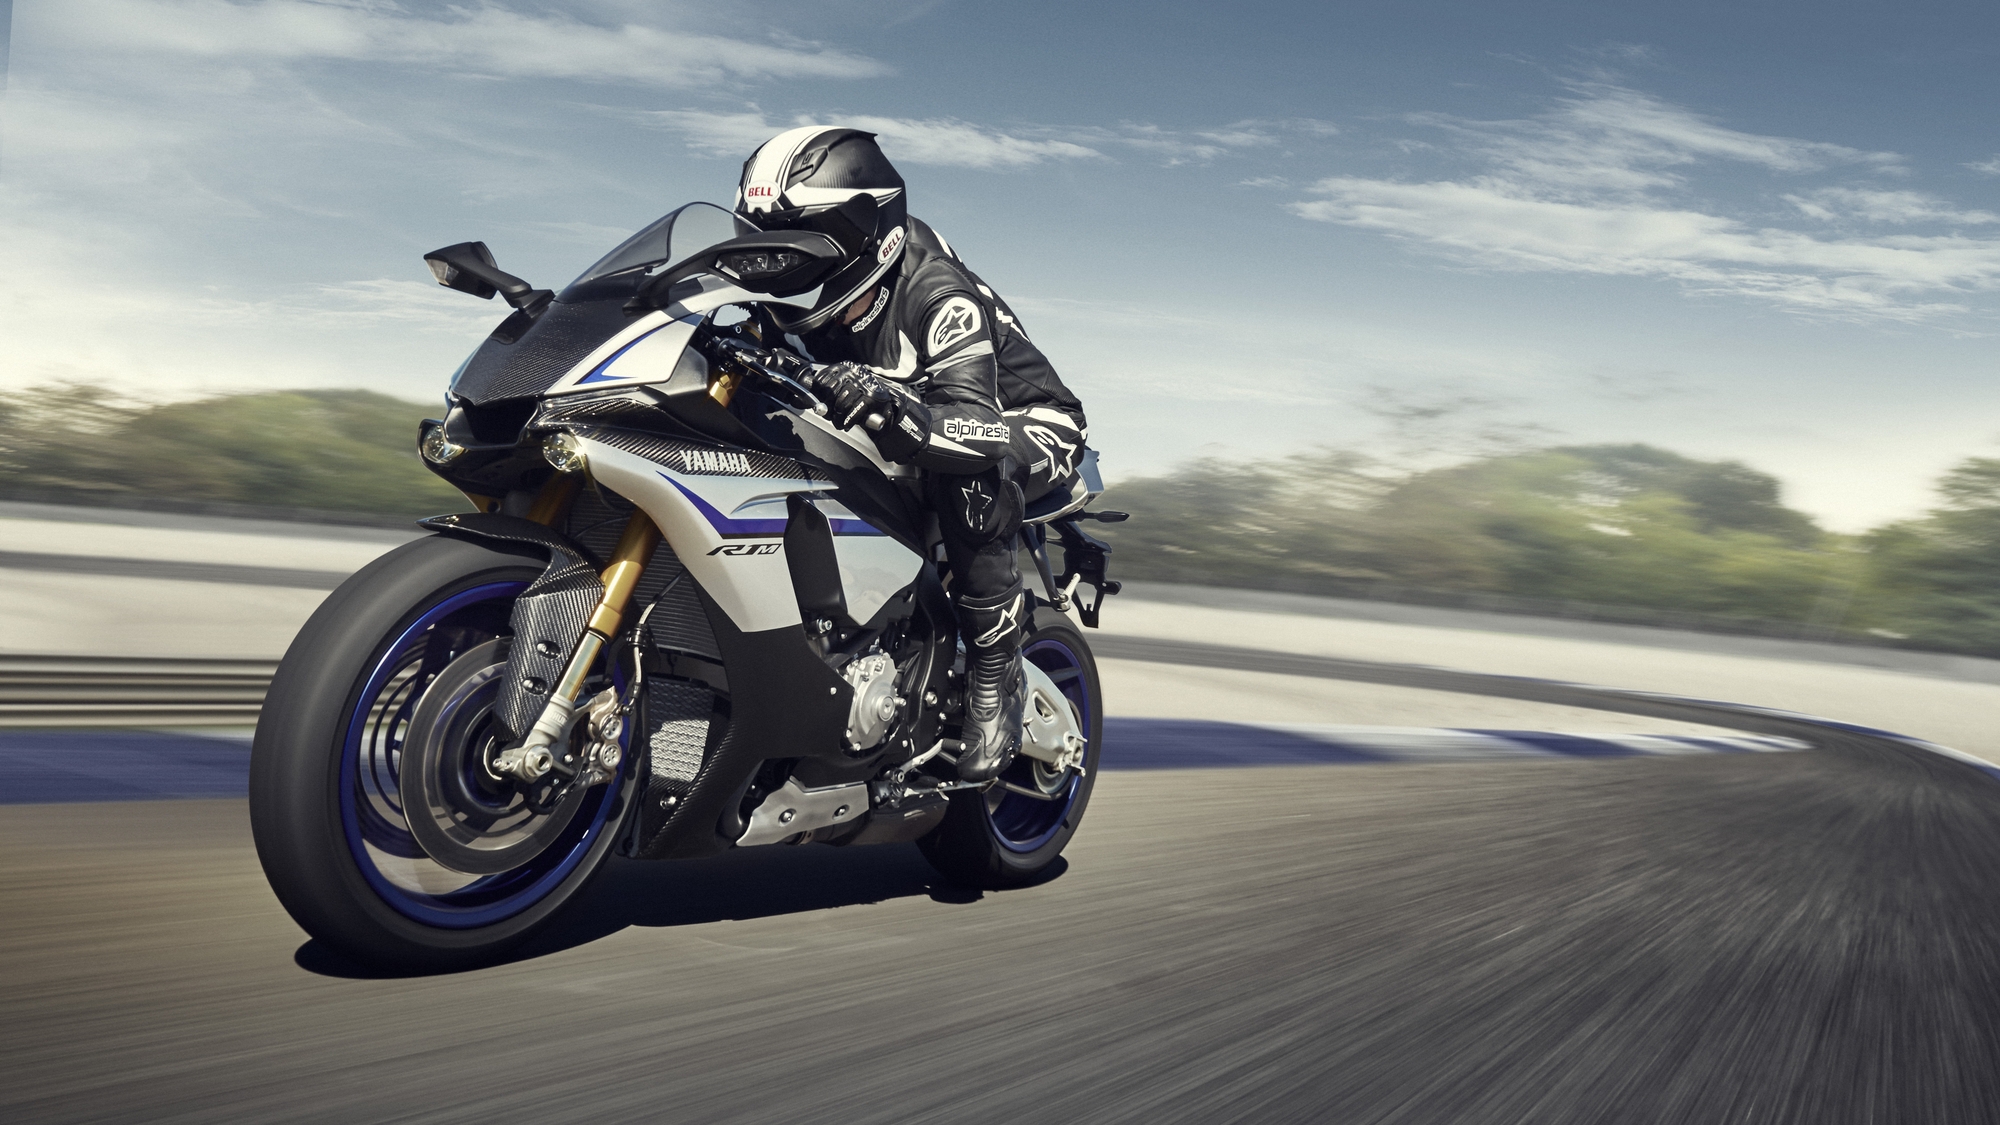 India-bound 2015 Yamaha R1 costs Rs. 15 lakh in UK